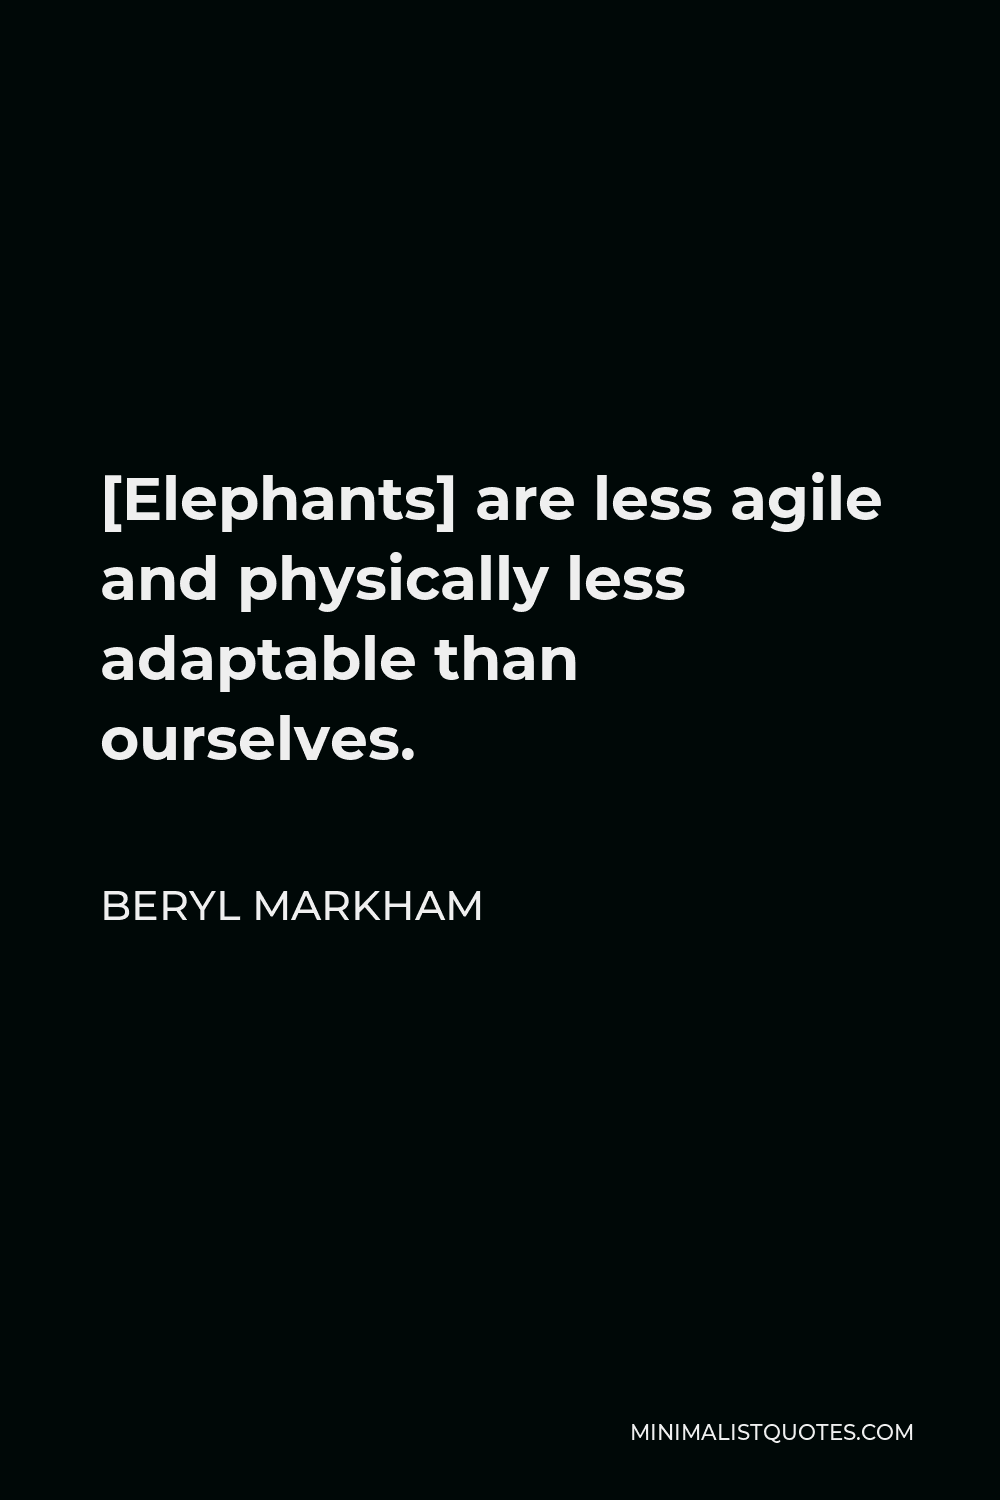 Beryl Markham Quote - [Elephants] are less agile and physically less adaptable than ourselves.